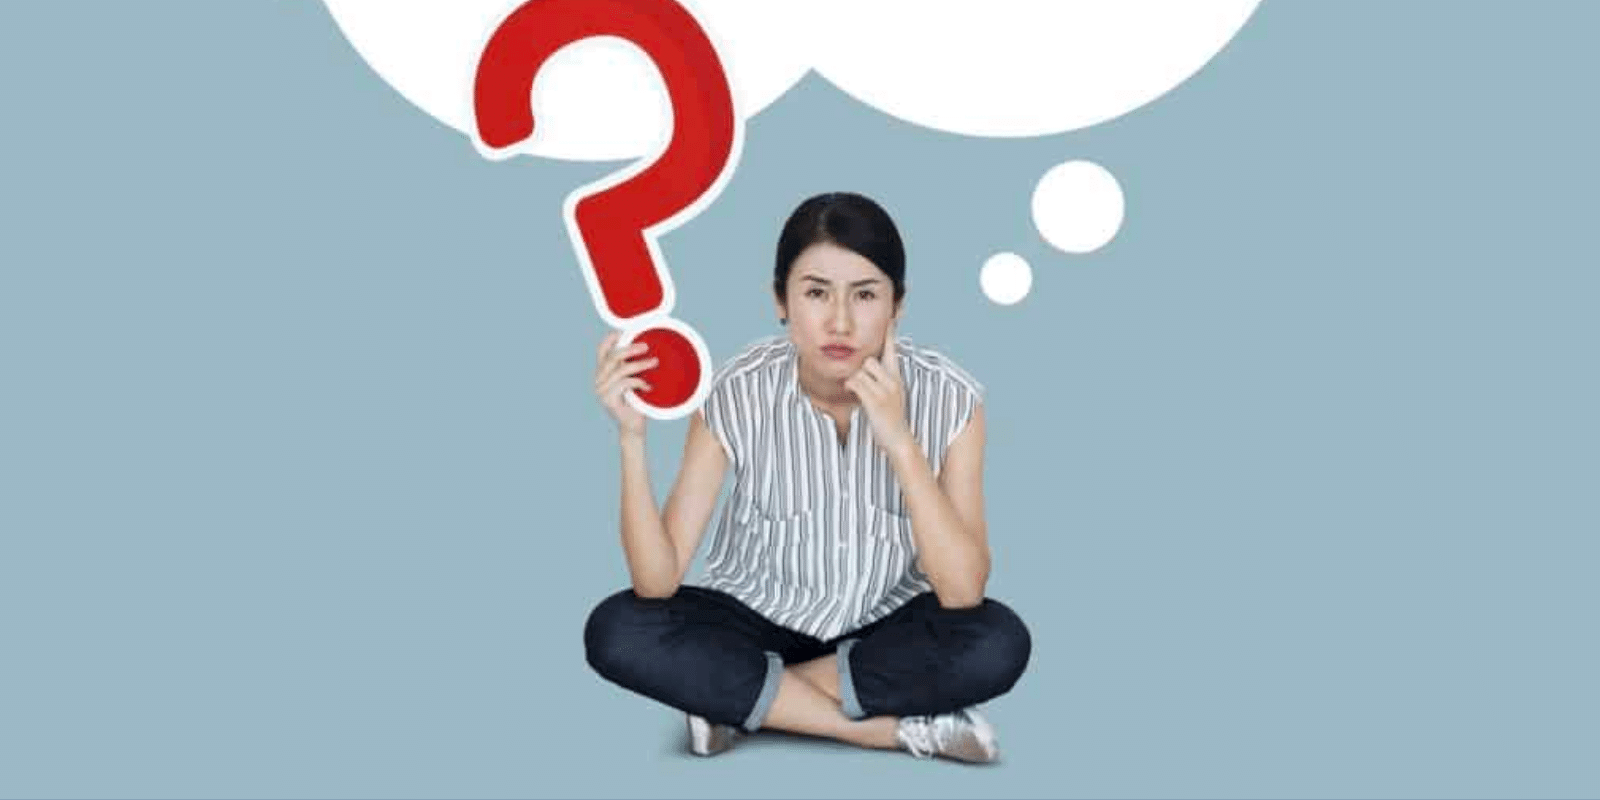 A woman holding question mark under a white empty thought bubble